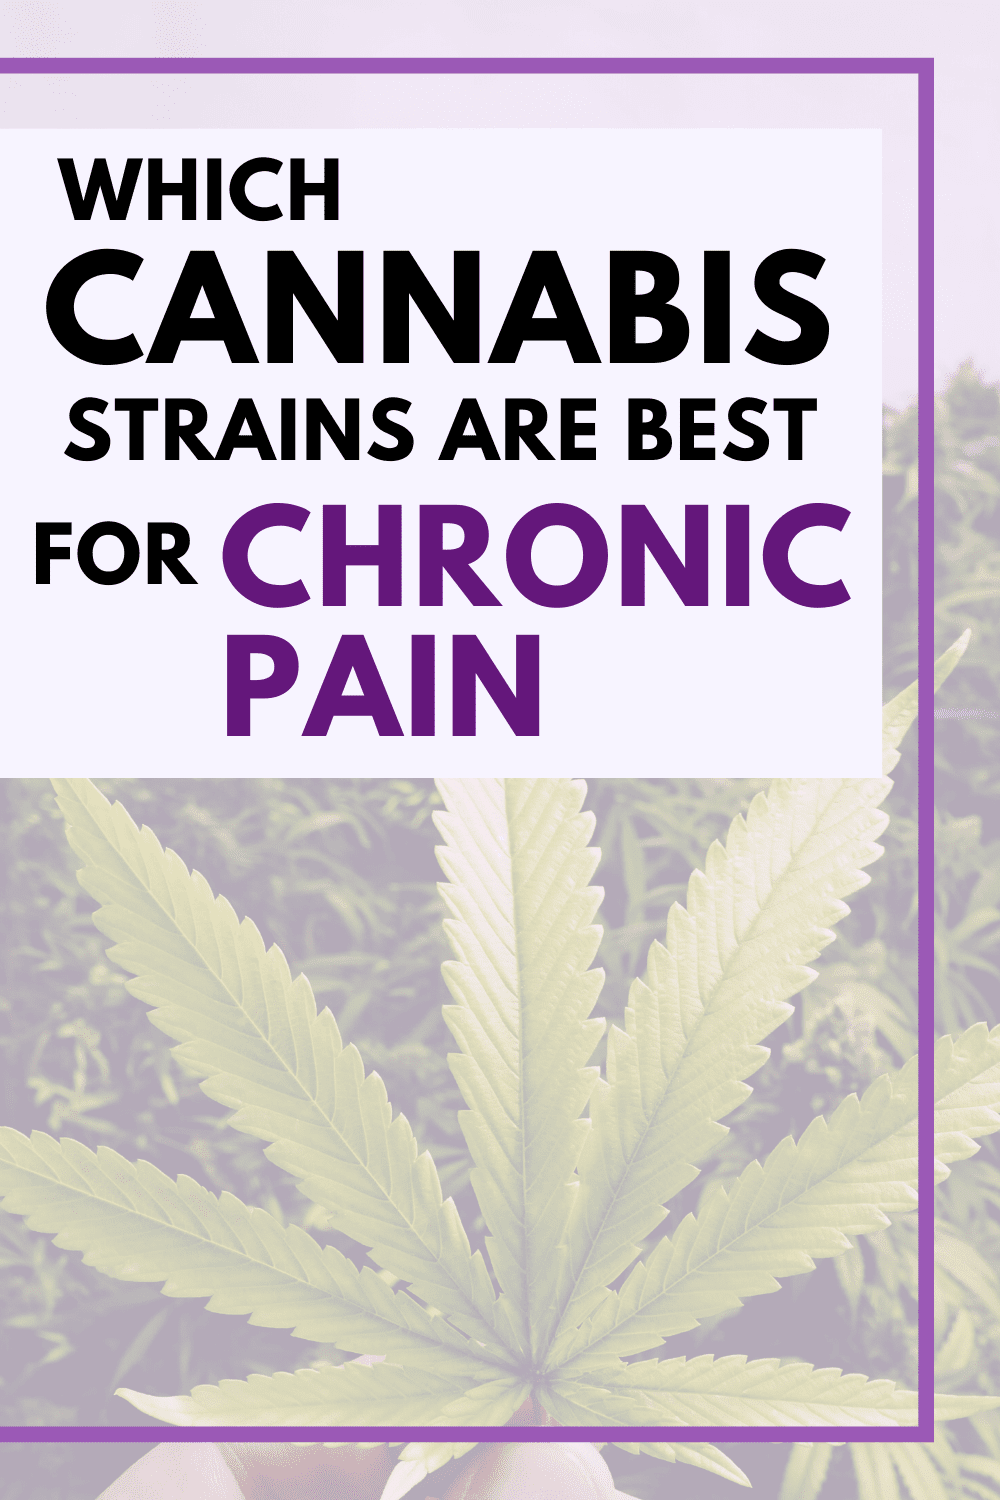 Which Cannabis Strains Are Best for Chronic Pain?